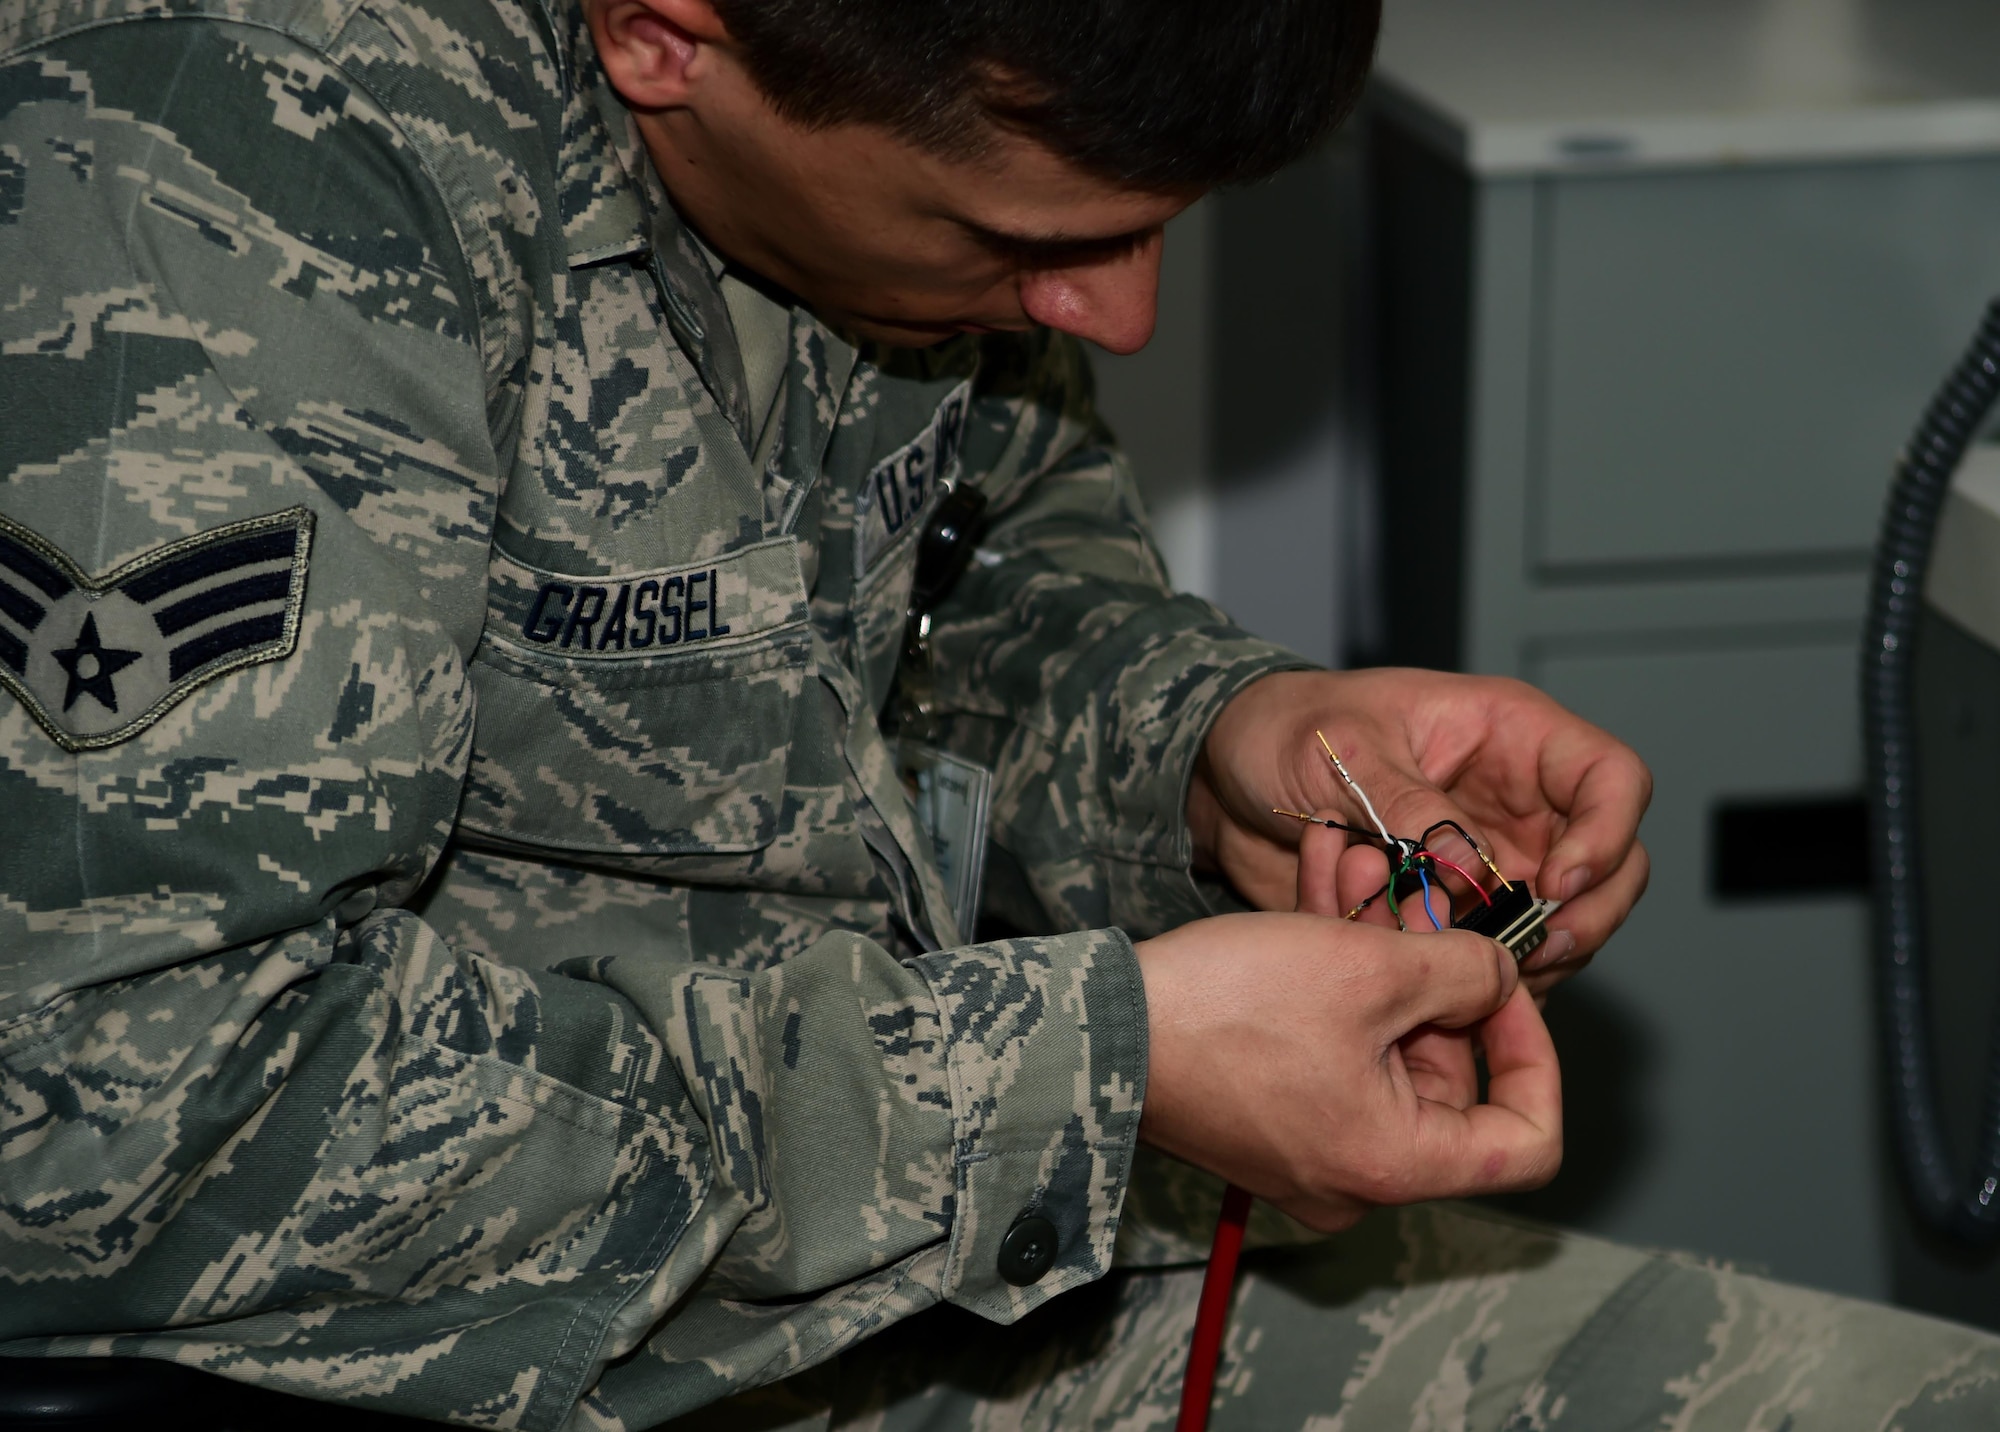 Senior Airman Mark Grassel, 460th Space Communication Squadron Defense Red Switch Network technician, assembles a propriety DB25 amphenol cable to upgrade an existing circuit Oct. 20, 2016, on Buckley Air Force Base, Colo. These circuits are updated routinely to maintain mission readiness. (U.S. Air Force photo by Airman Holden S. Faul/ Released)